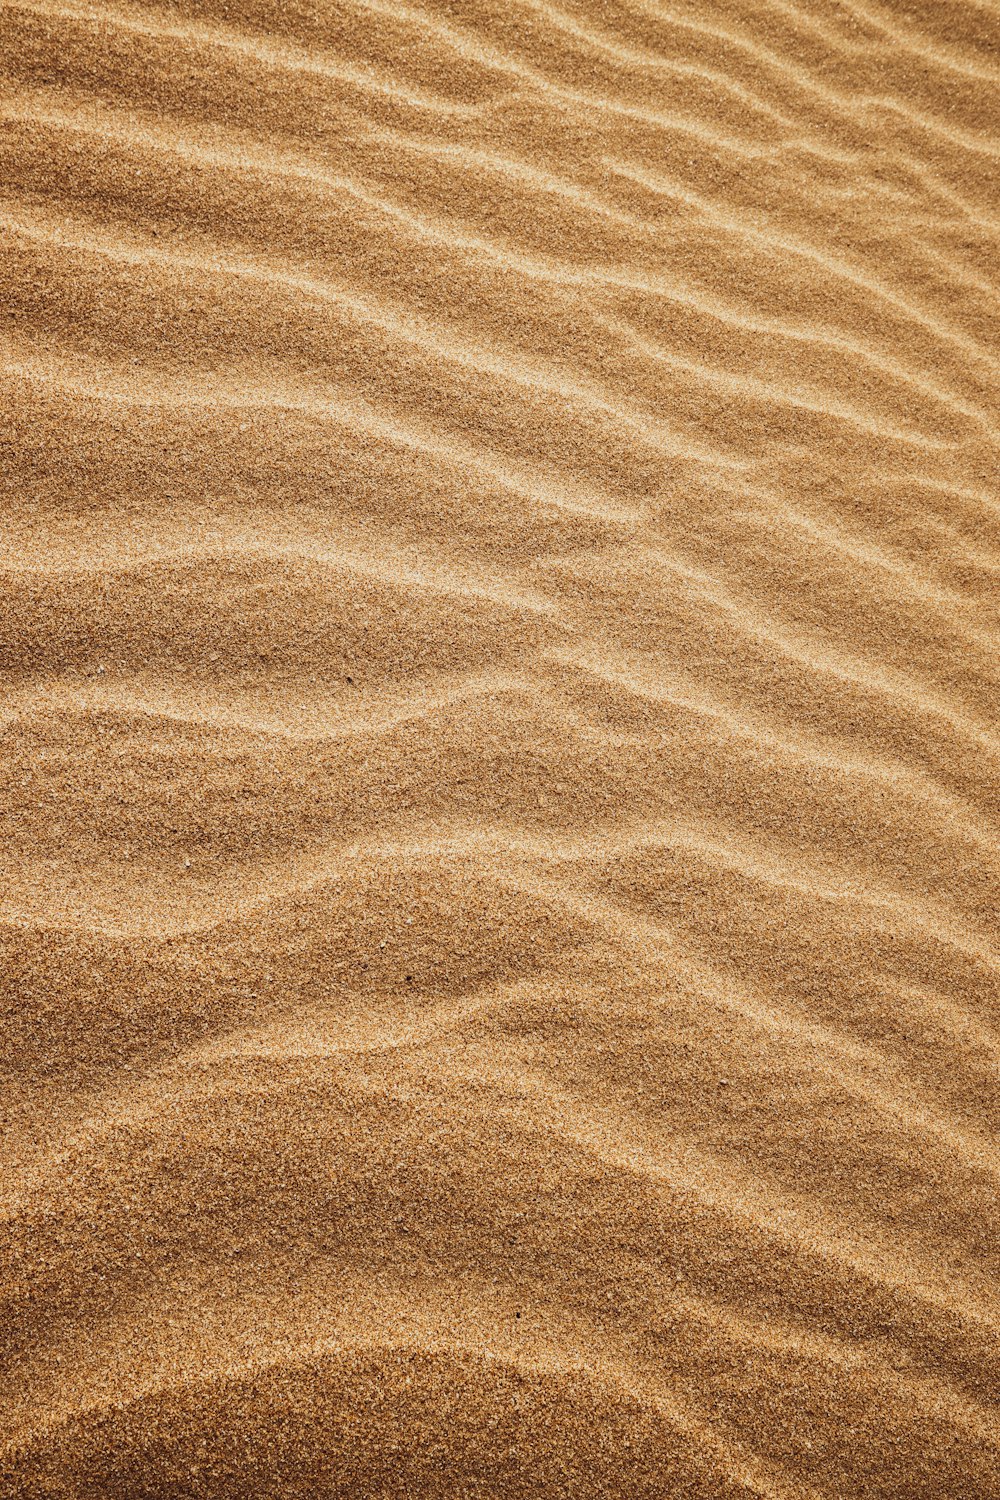 a sandy area with small waves in the sand